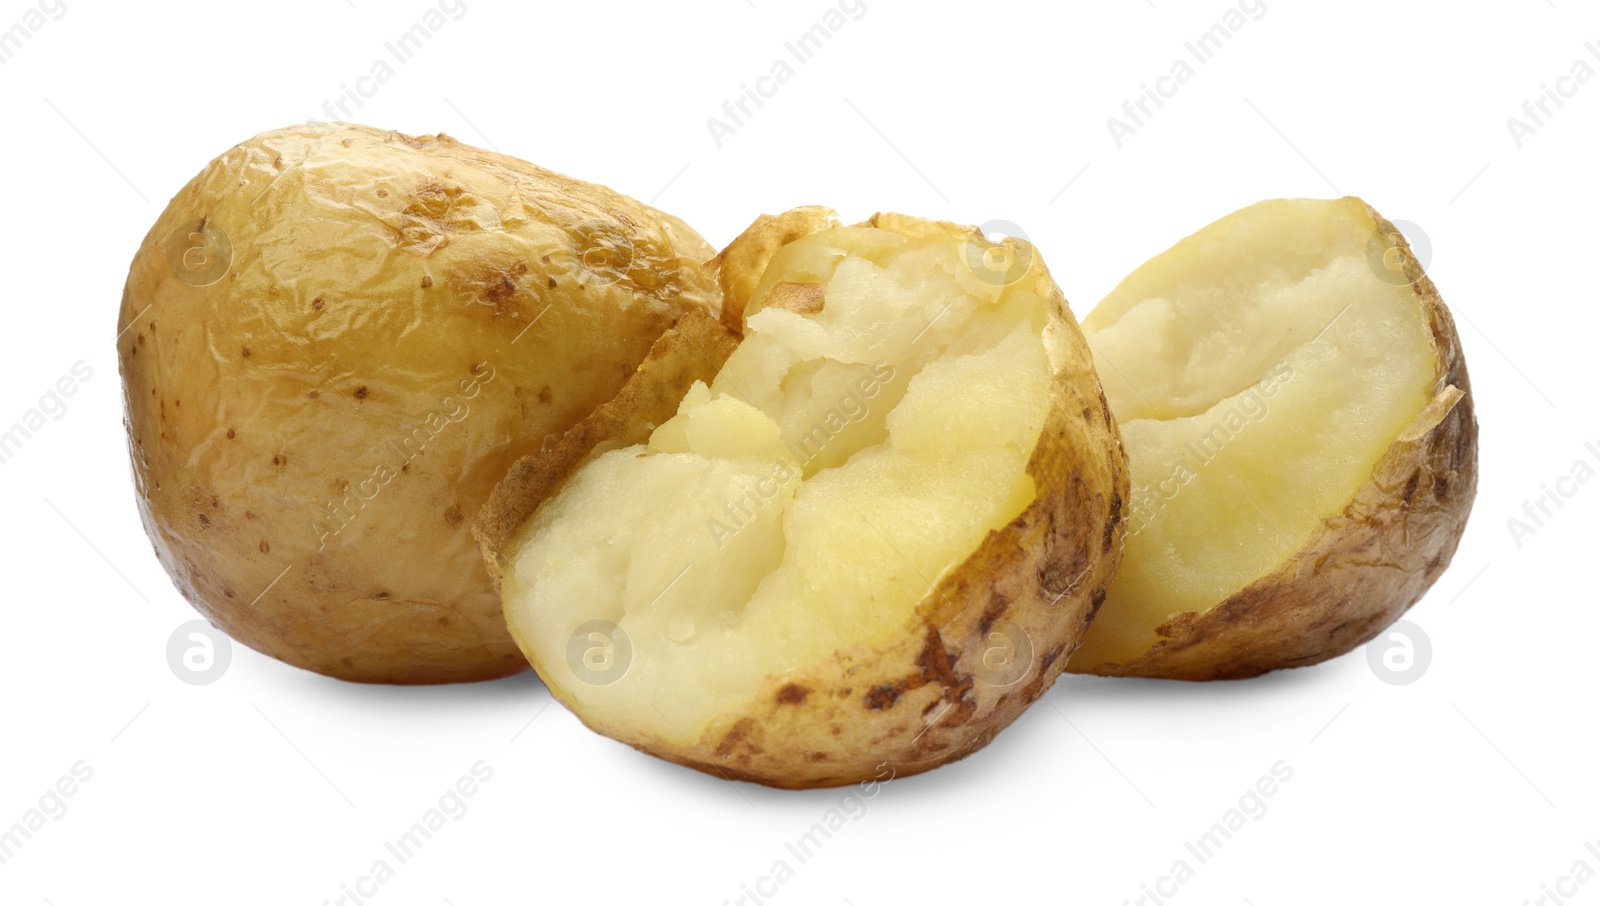 Photo of Tasty pieces of baked potatoes on white background